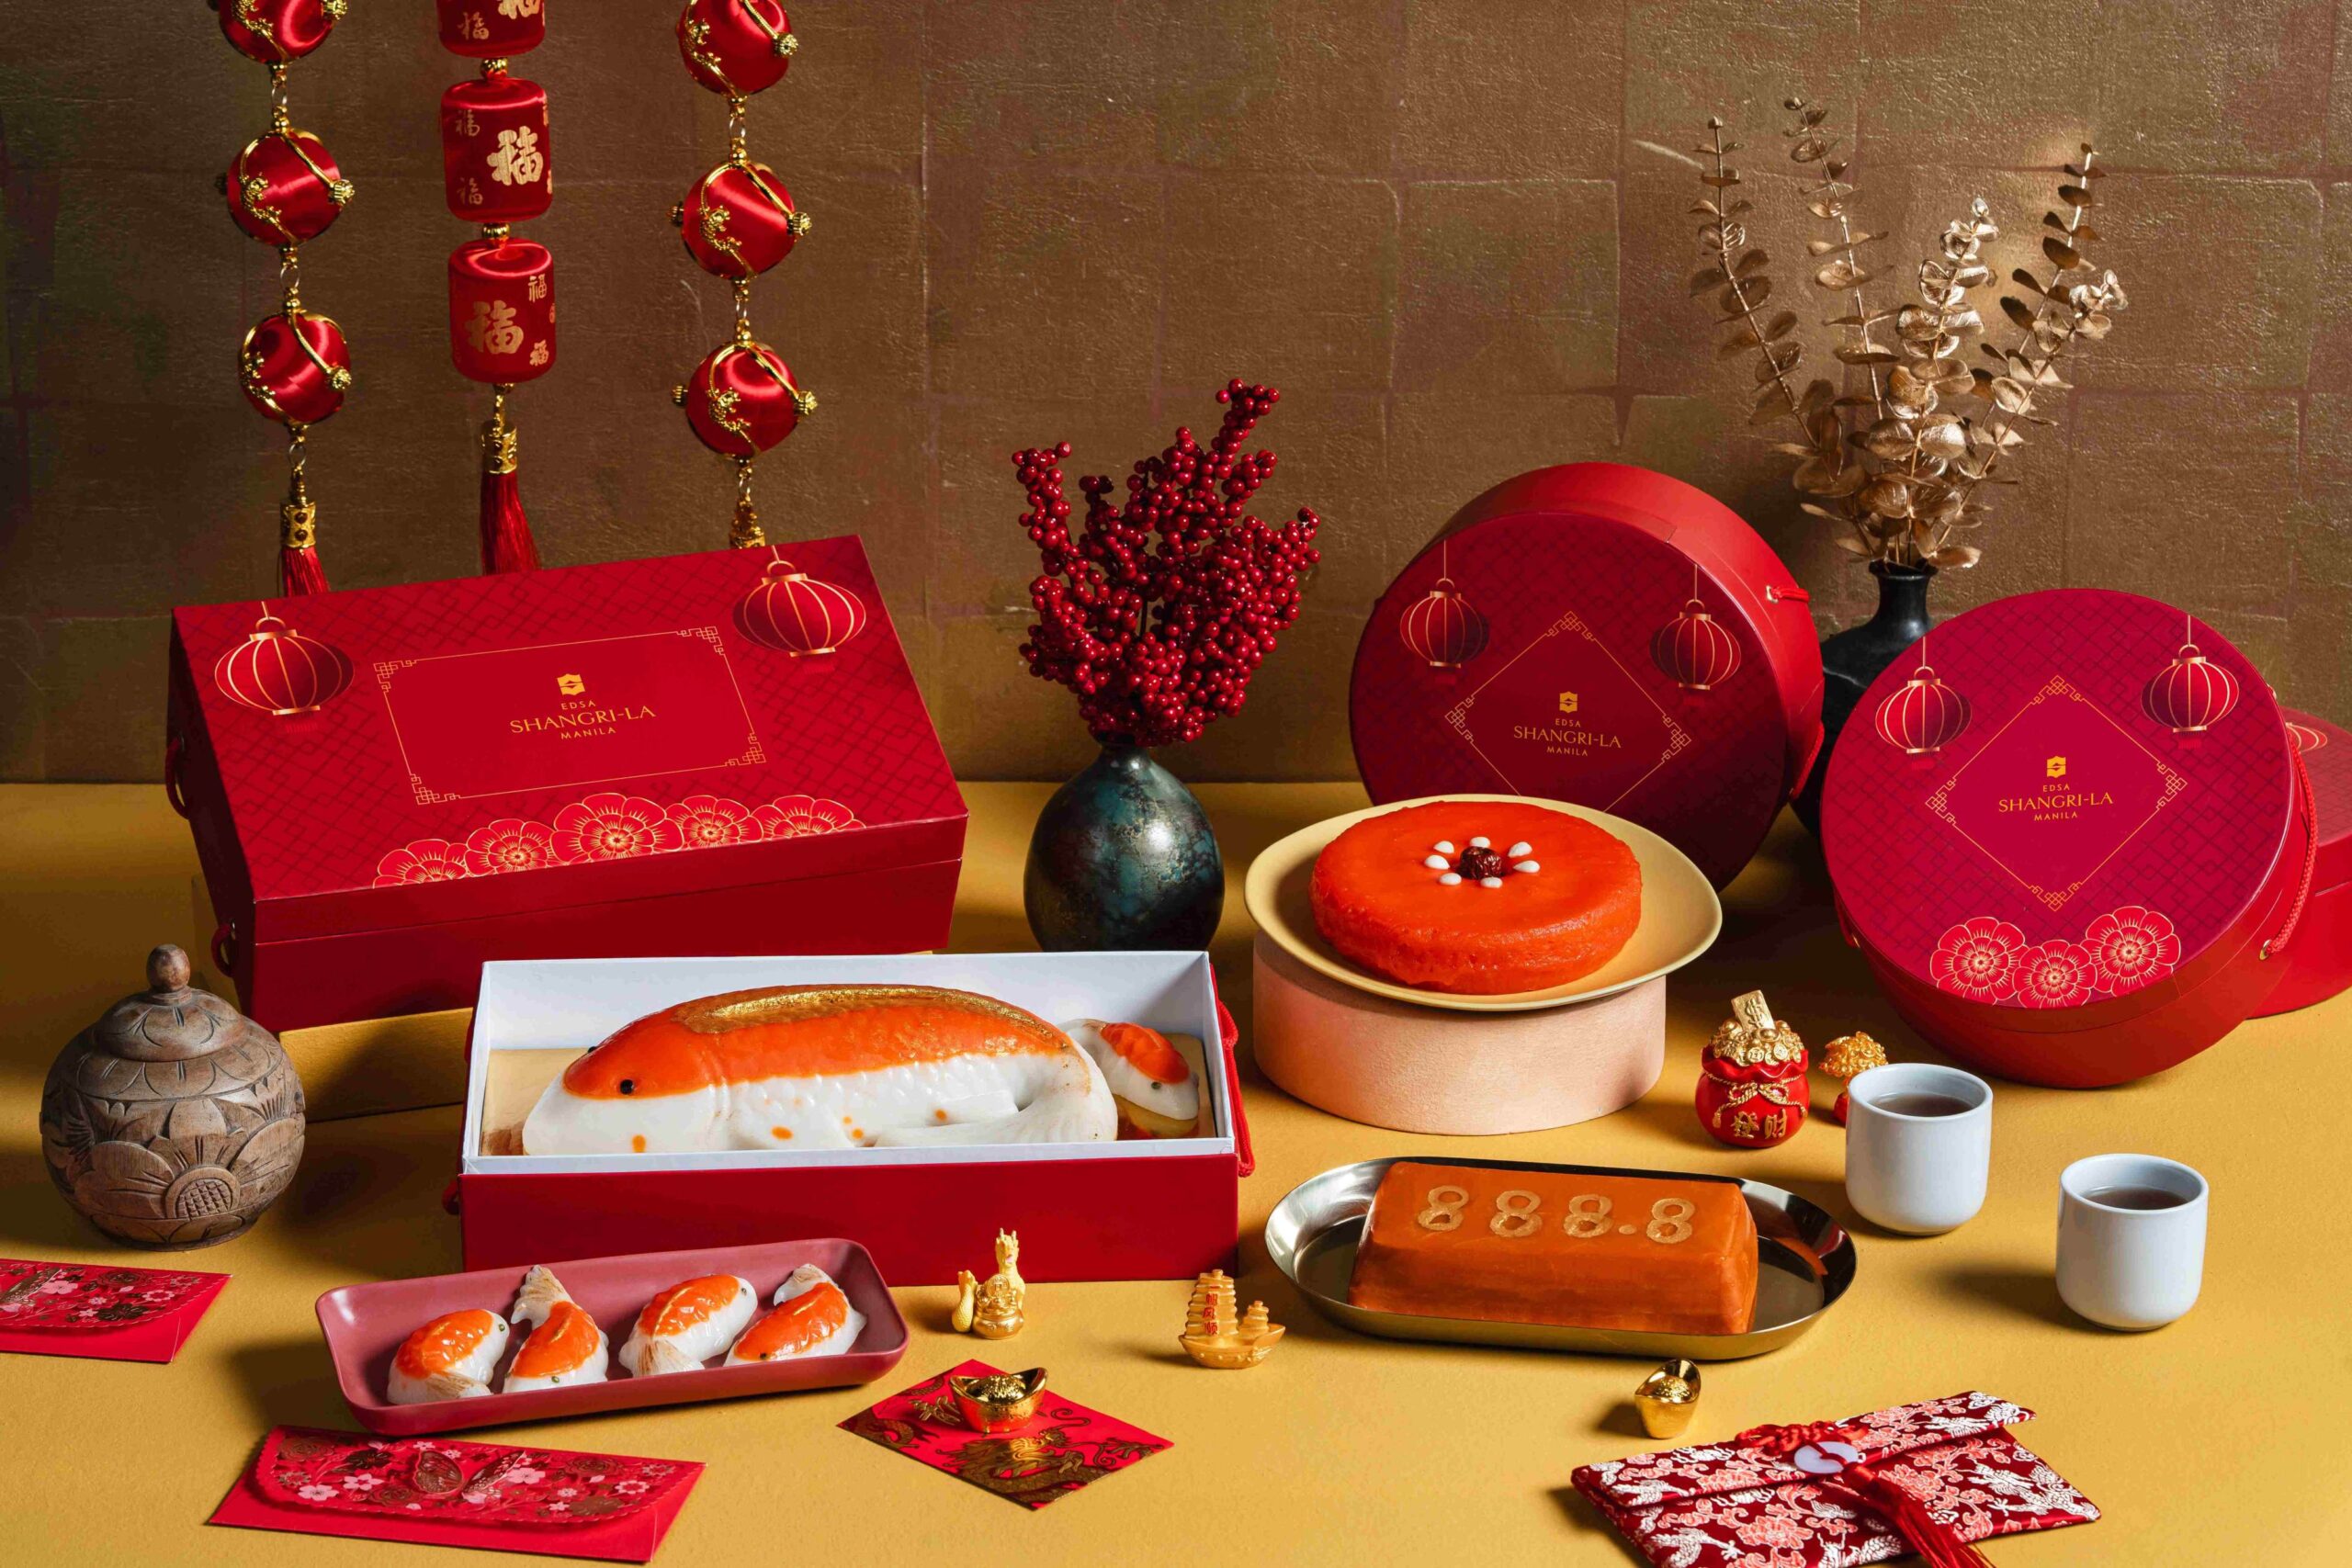 Welcome the Year of the Wood Dragon with Summer Palace's special Nian Gao collection